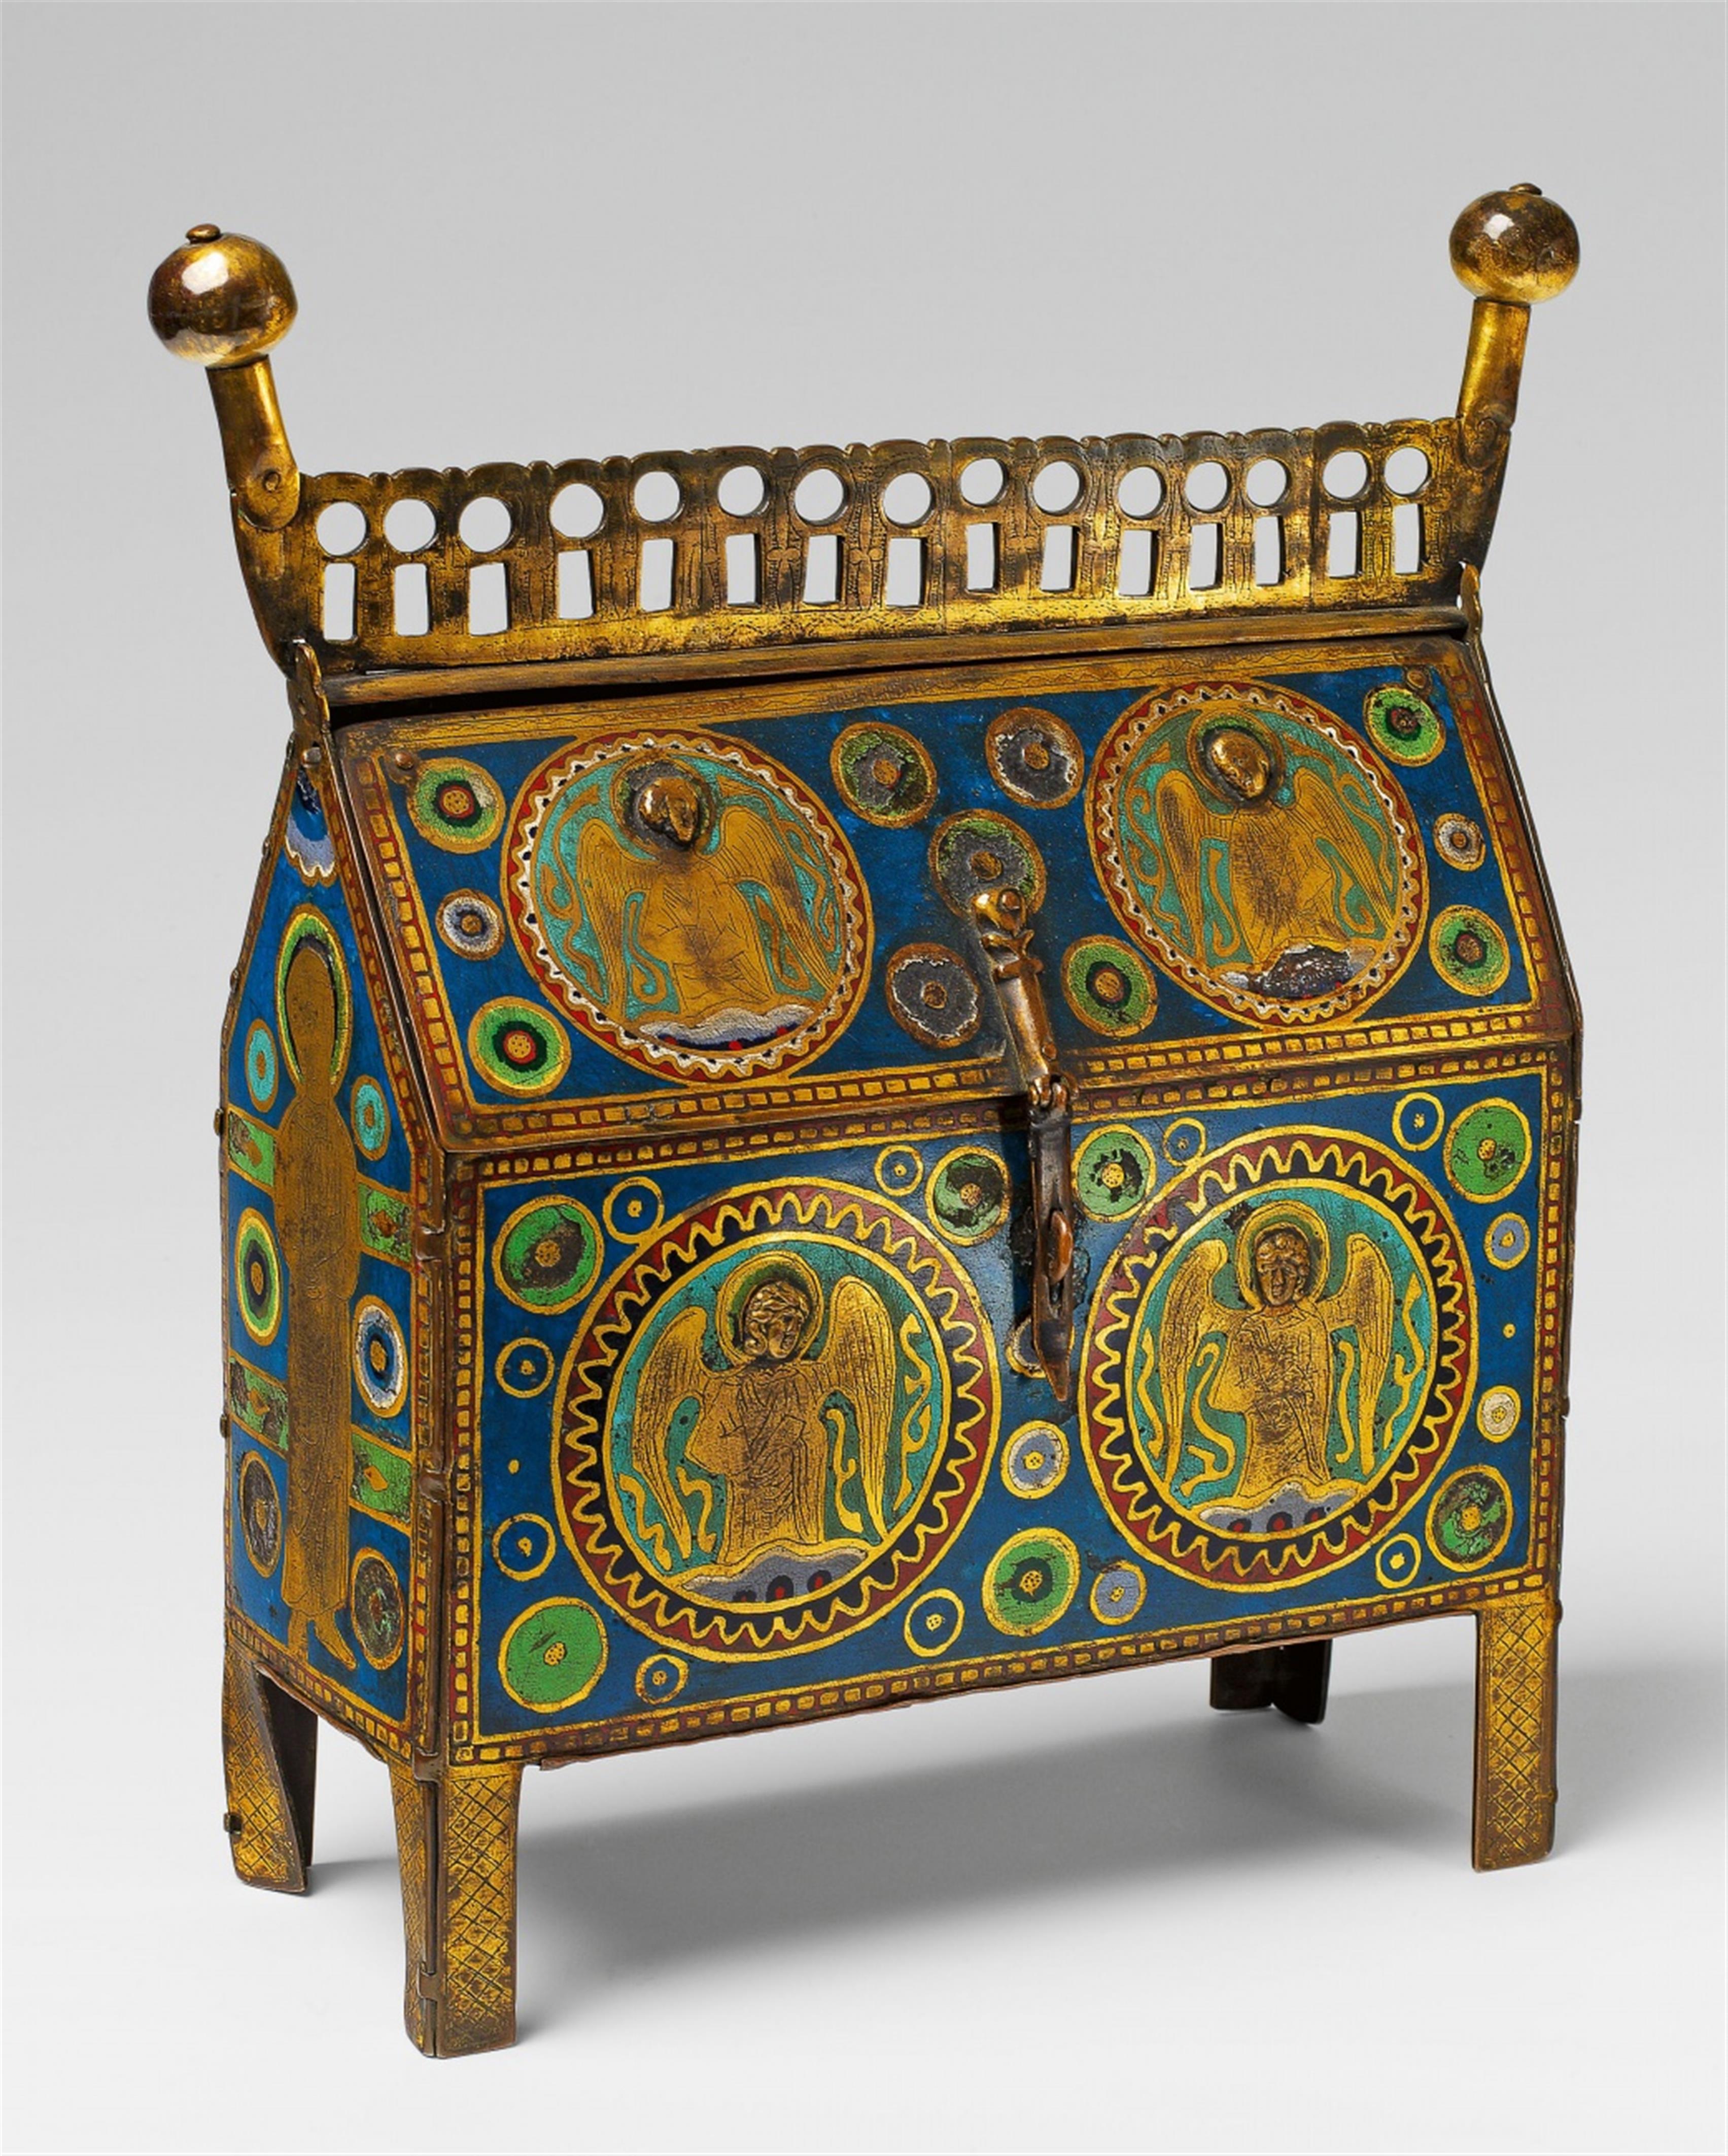 A Limoges enamel reliquary casket with the martyrdom of Thomas Becket - image-3